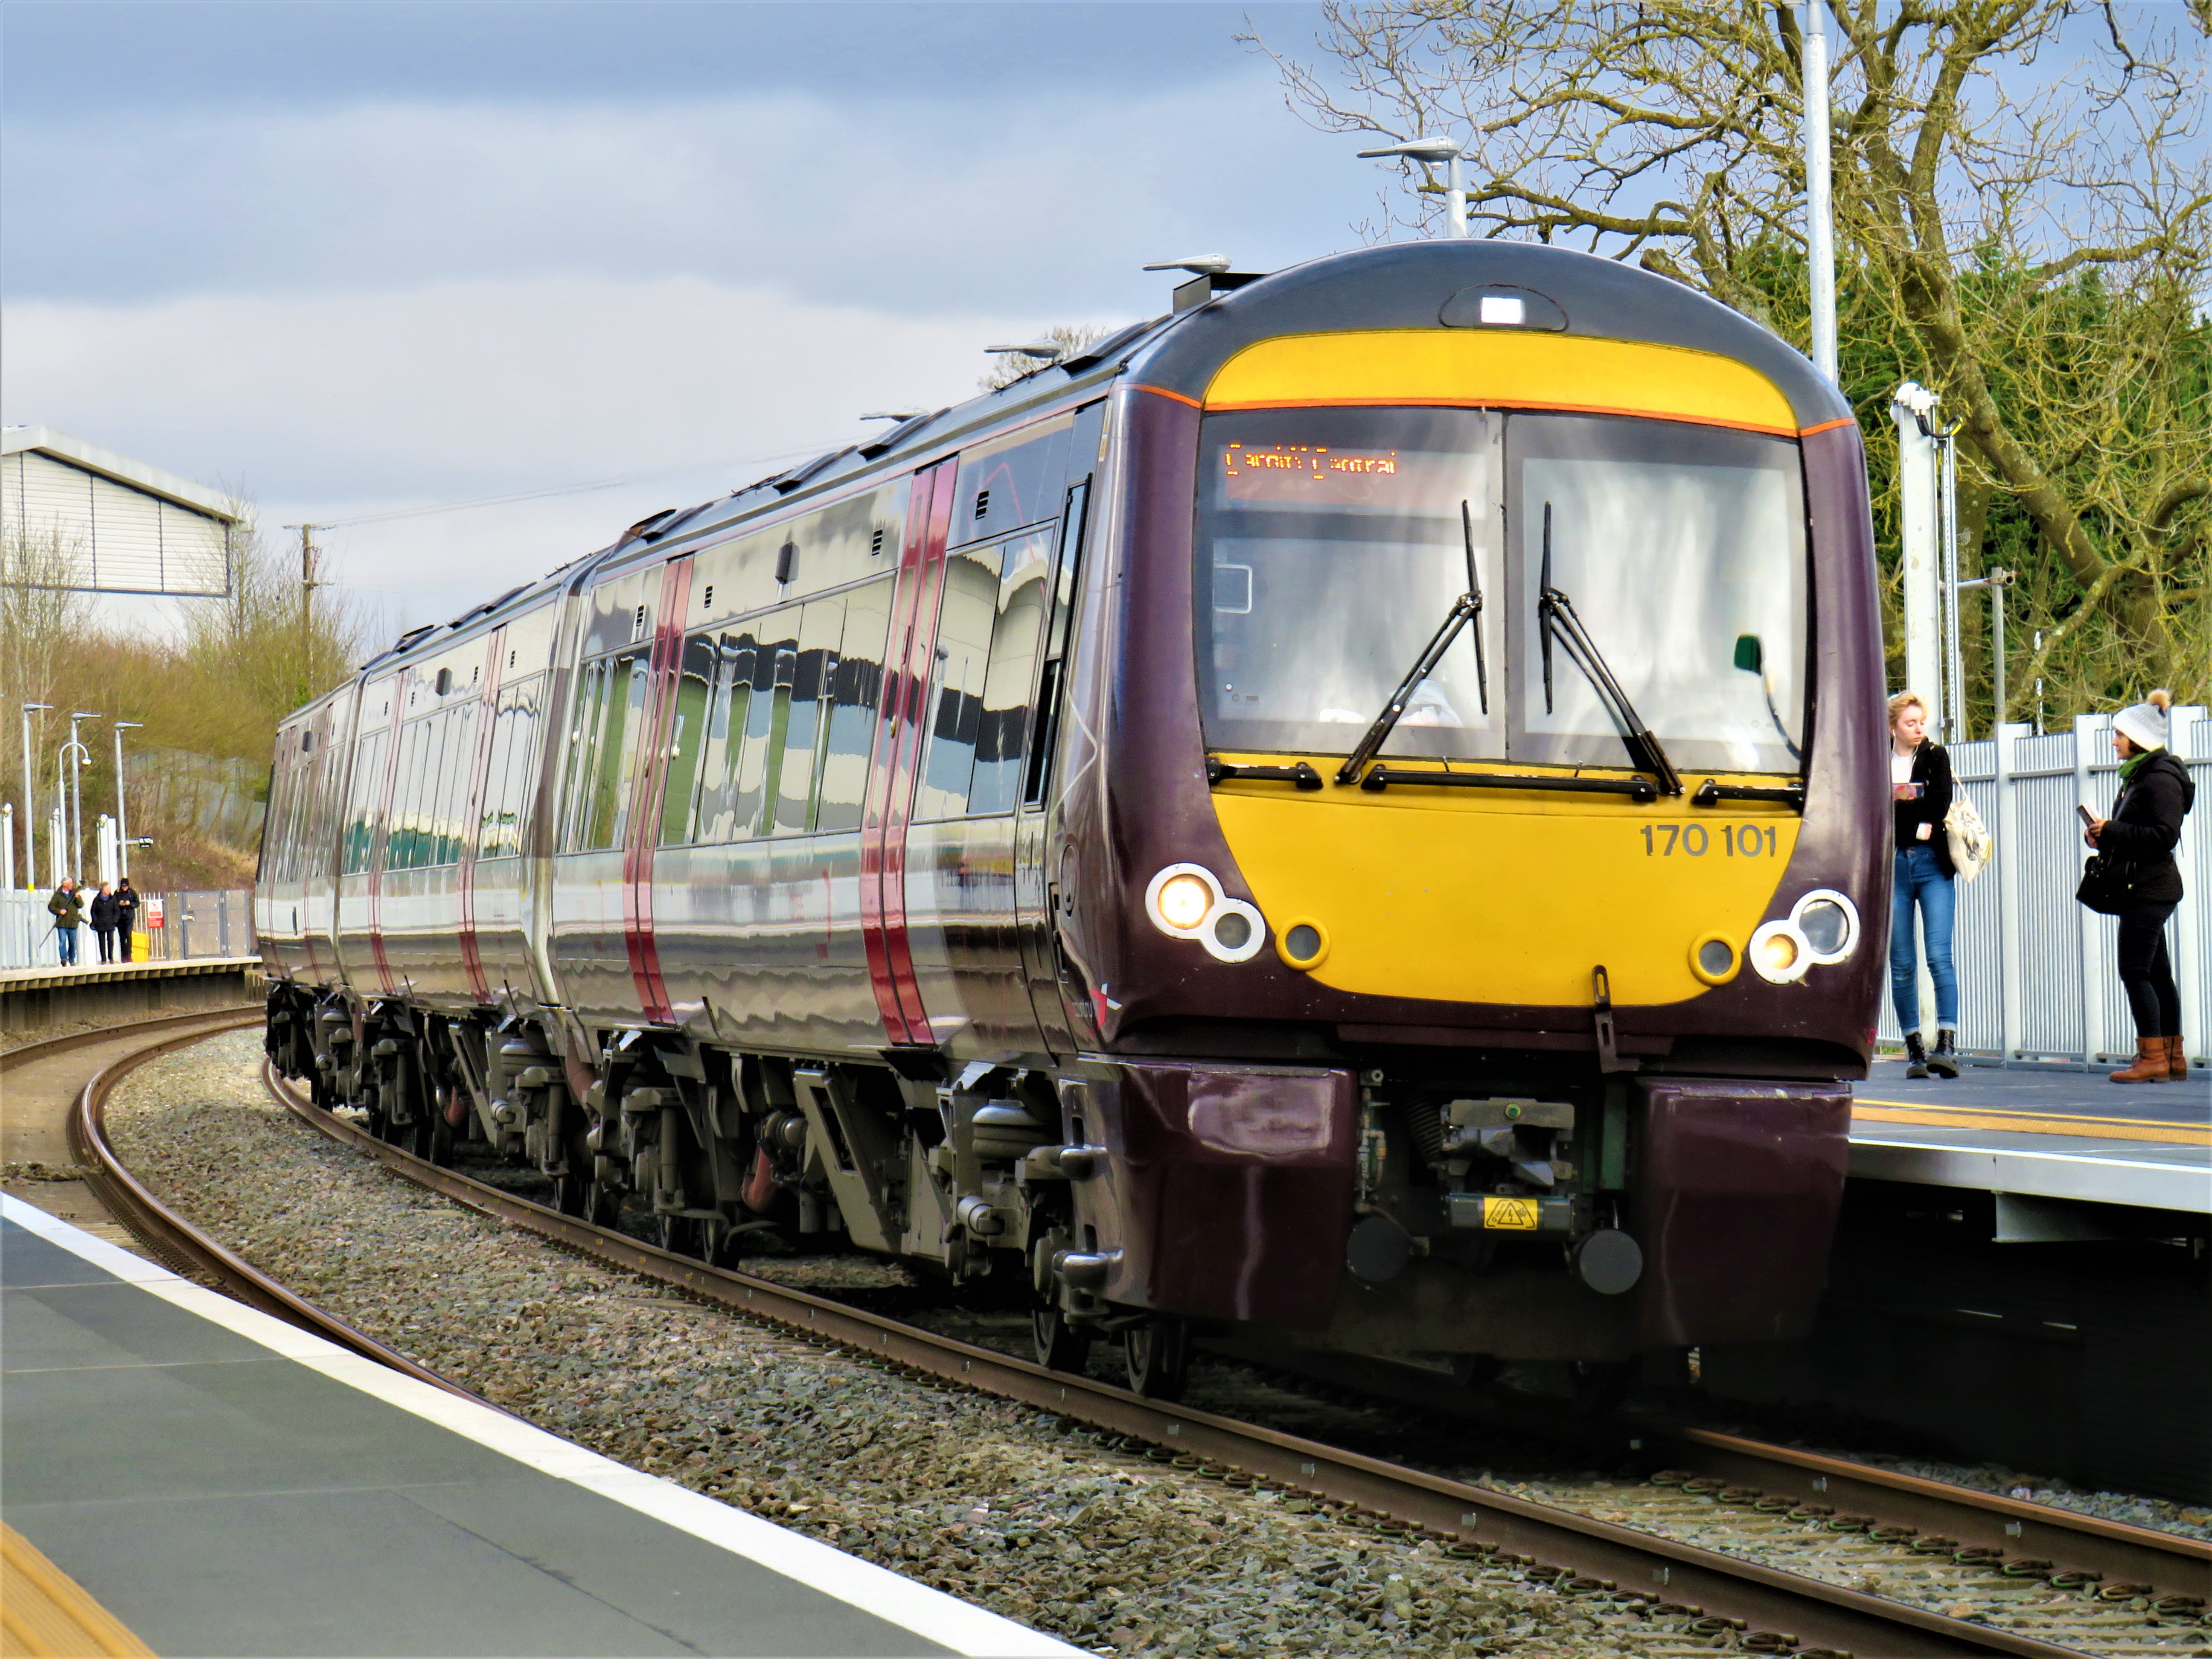 170101 at Worcestershire Parkway